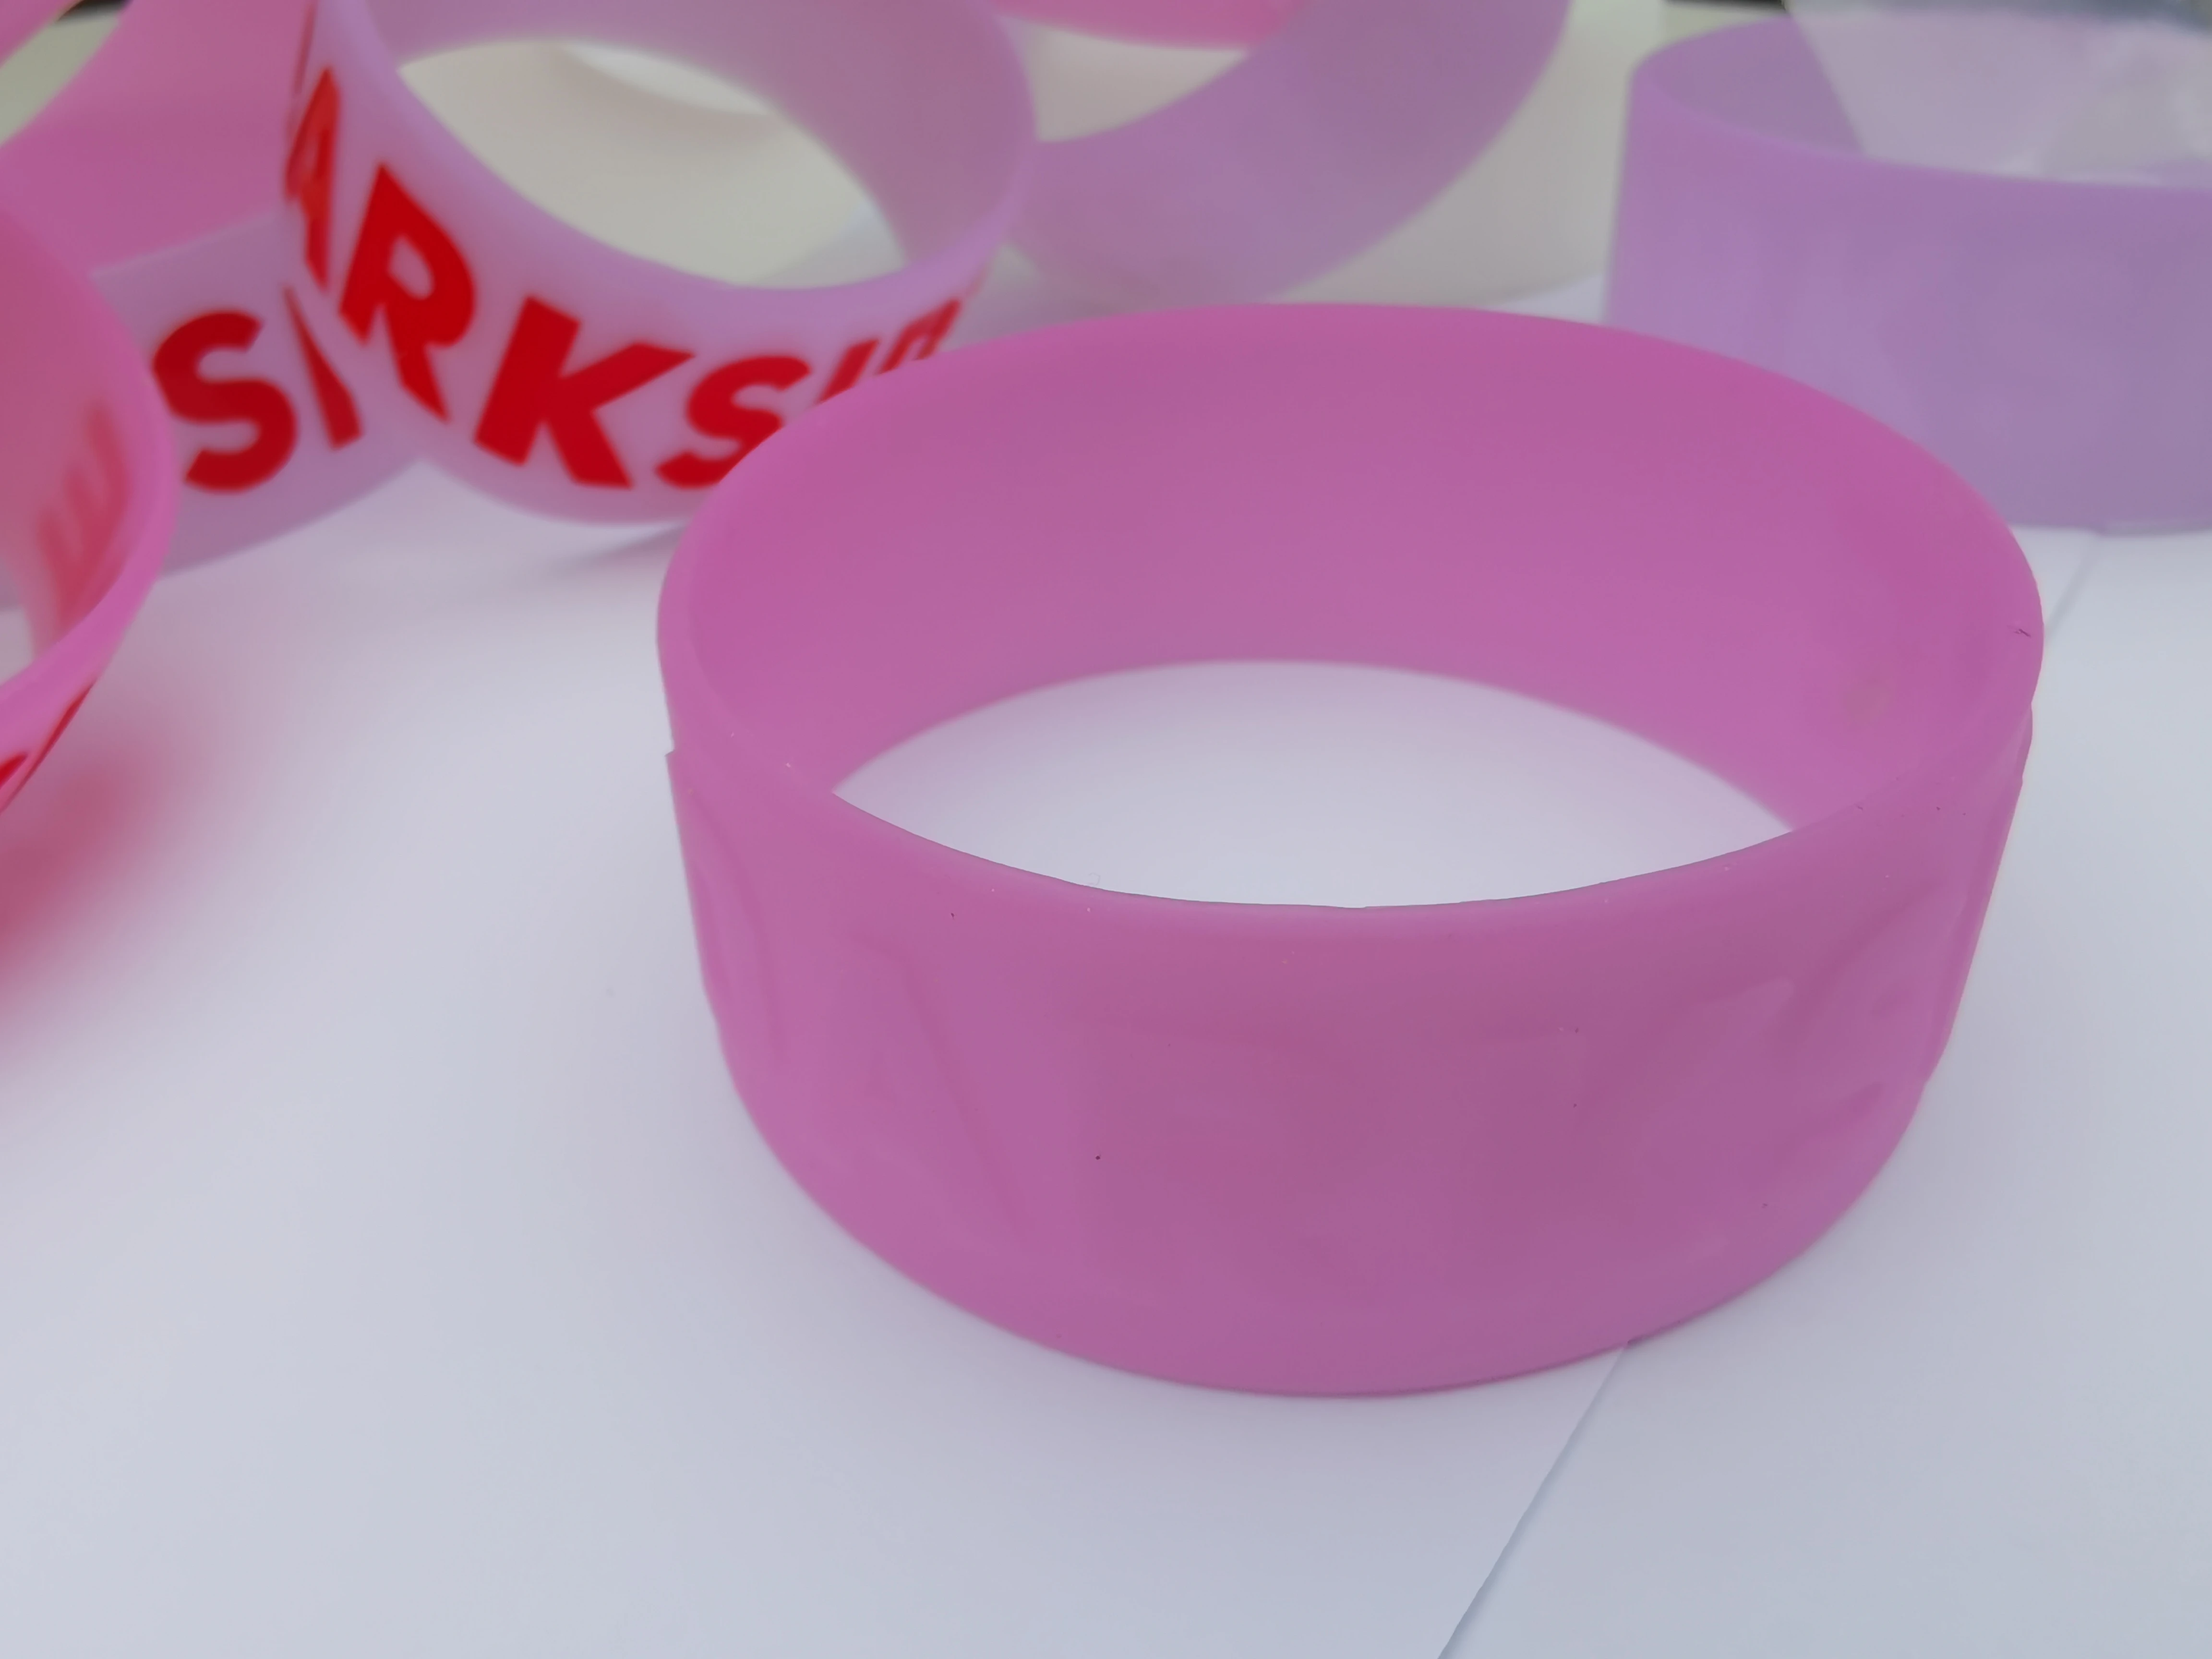 UV Silicone Wristbands, Change the Transparent Wristband to be purple or blue under sunshine